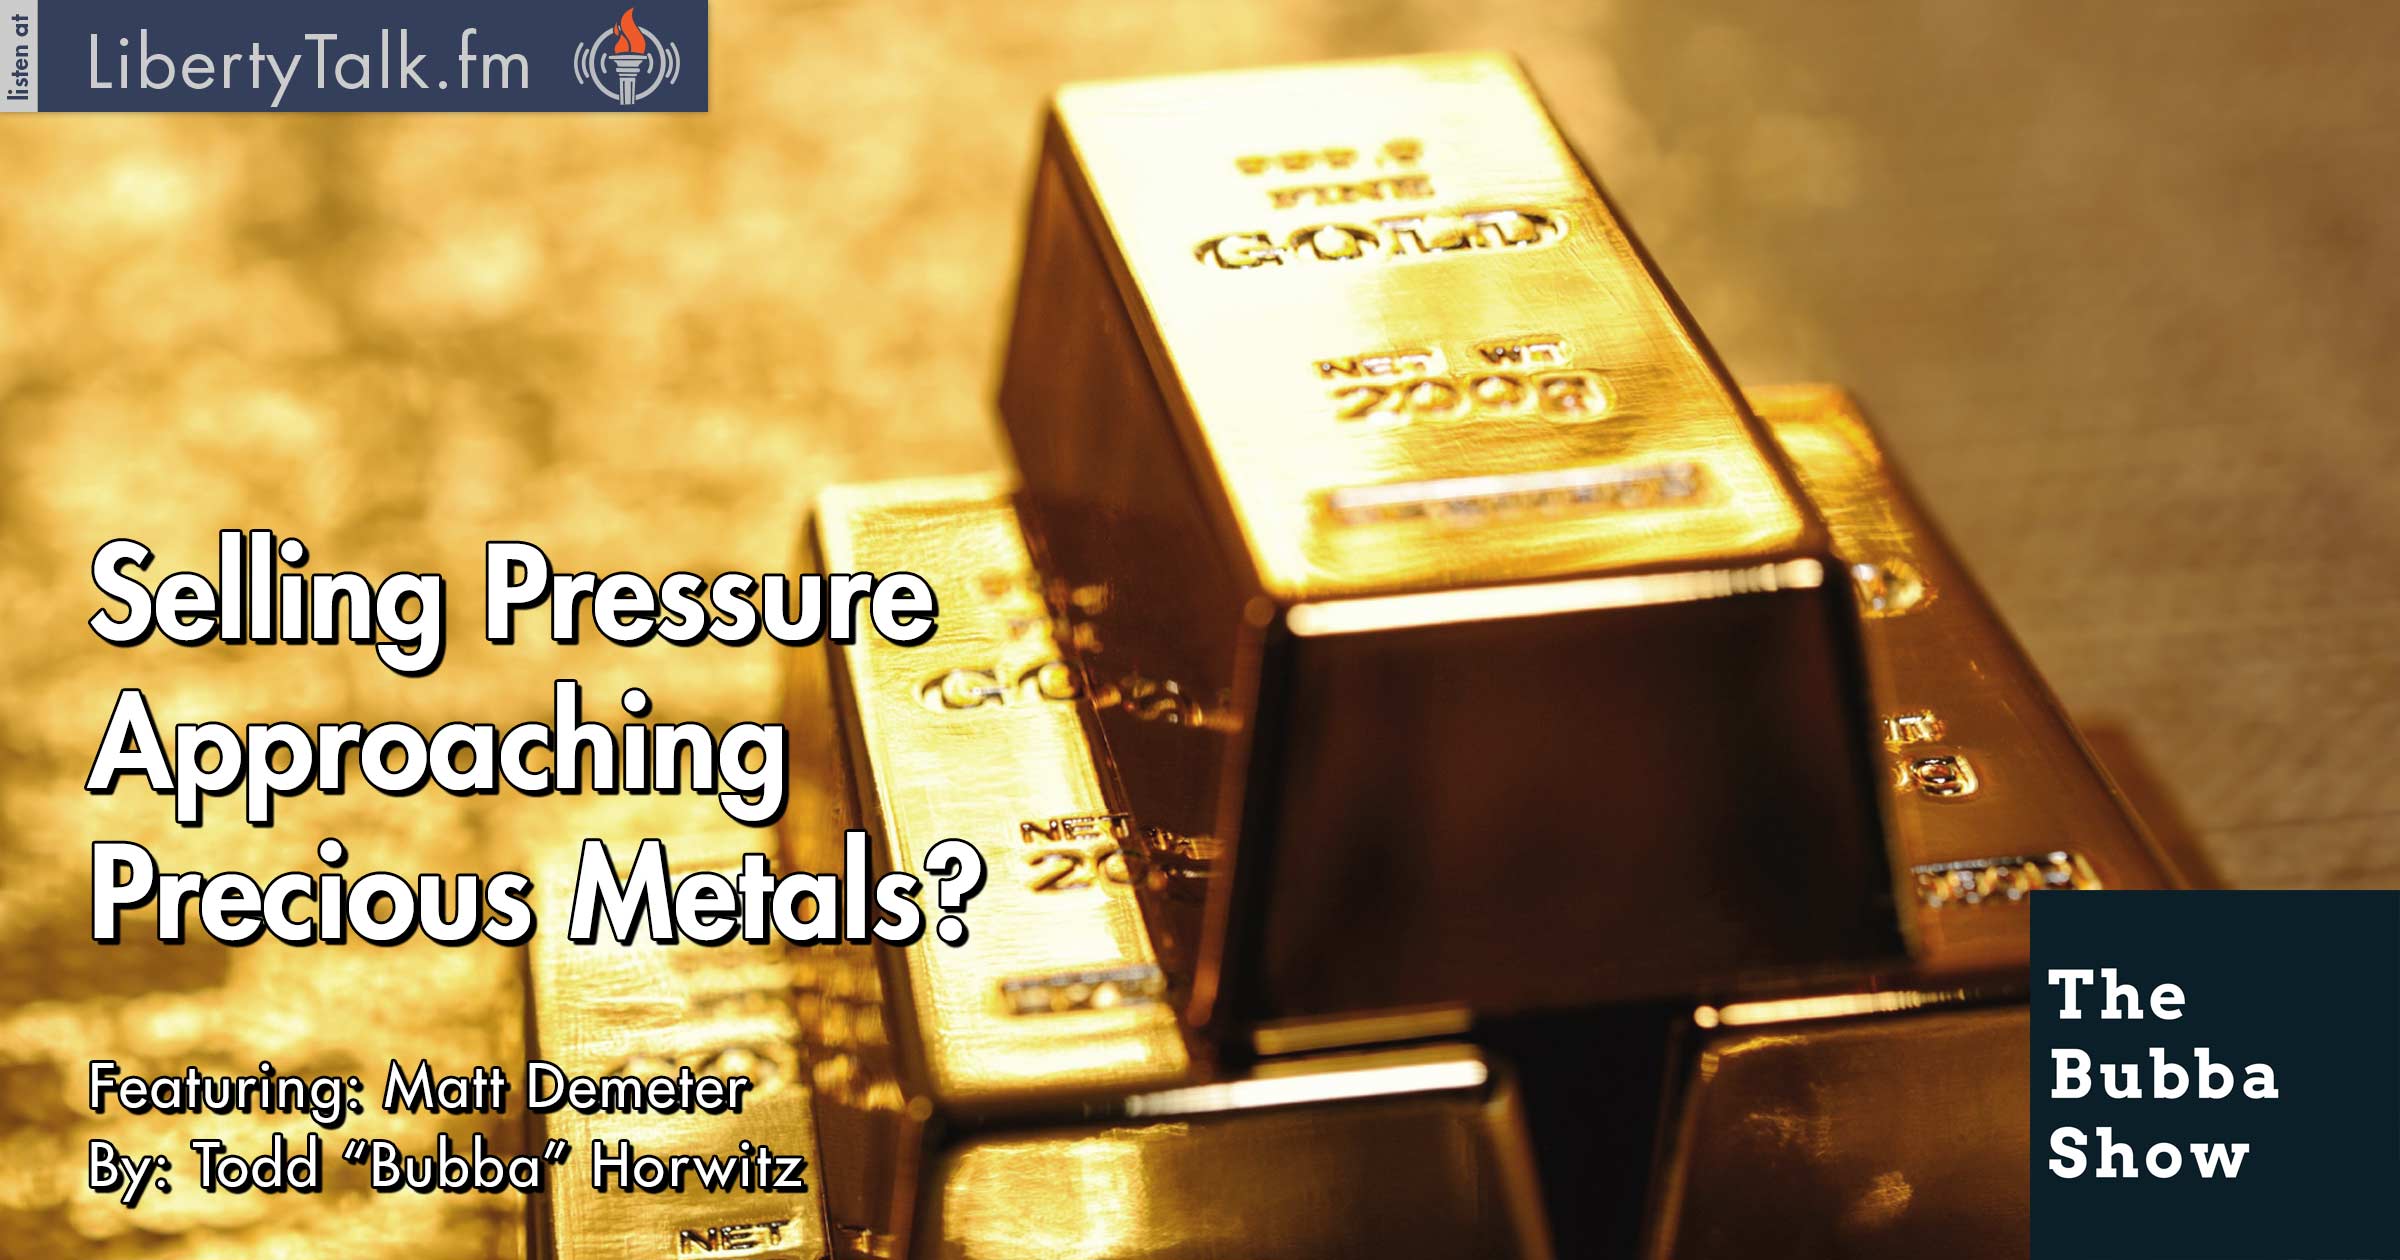 Selling Pressure Approaching Precious Metals? The Bubba Show